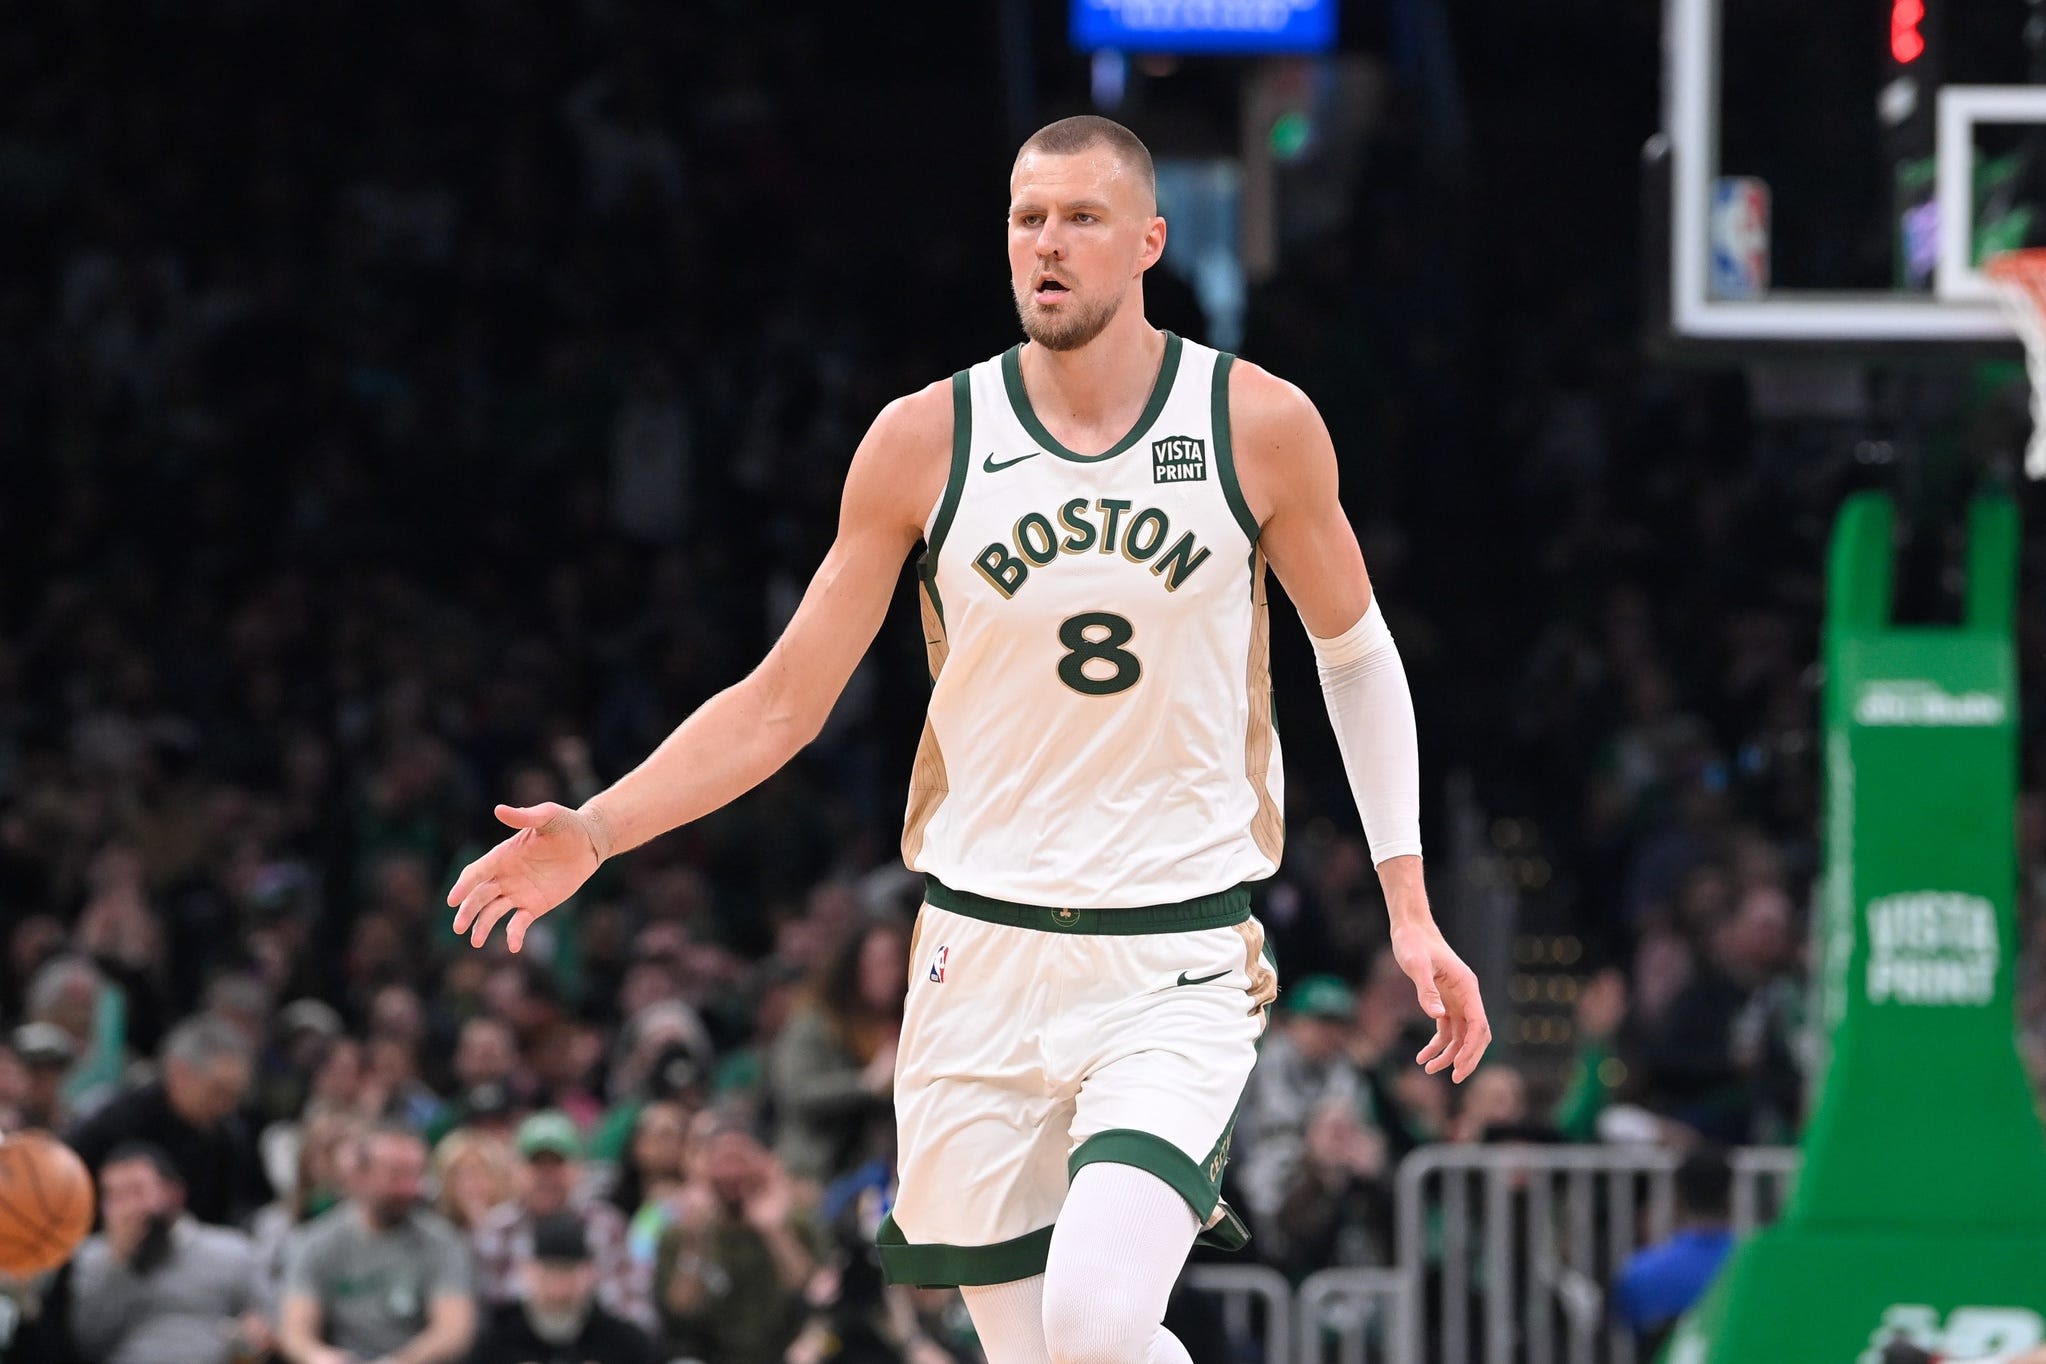 Kristaps Porzingis expected to return to Celtics lineup for Game 1 of NBA Finals